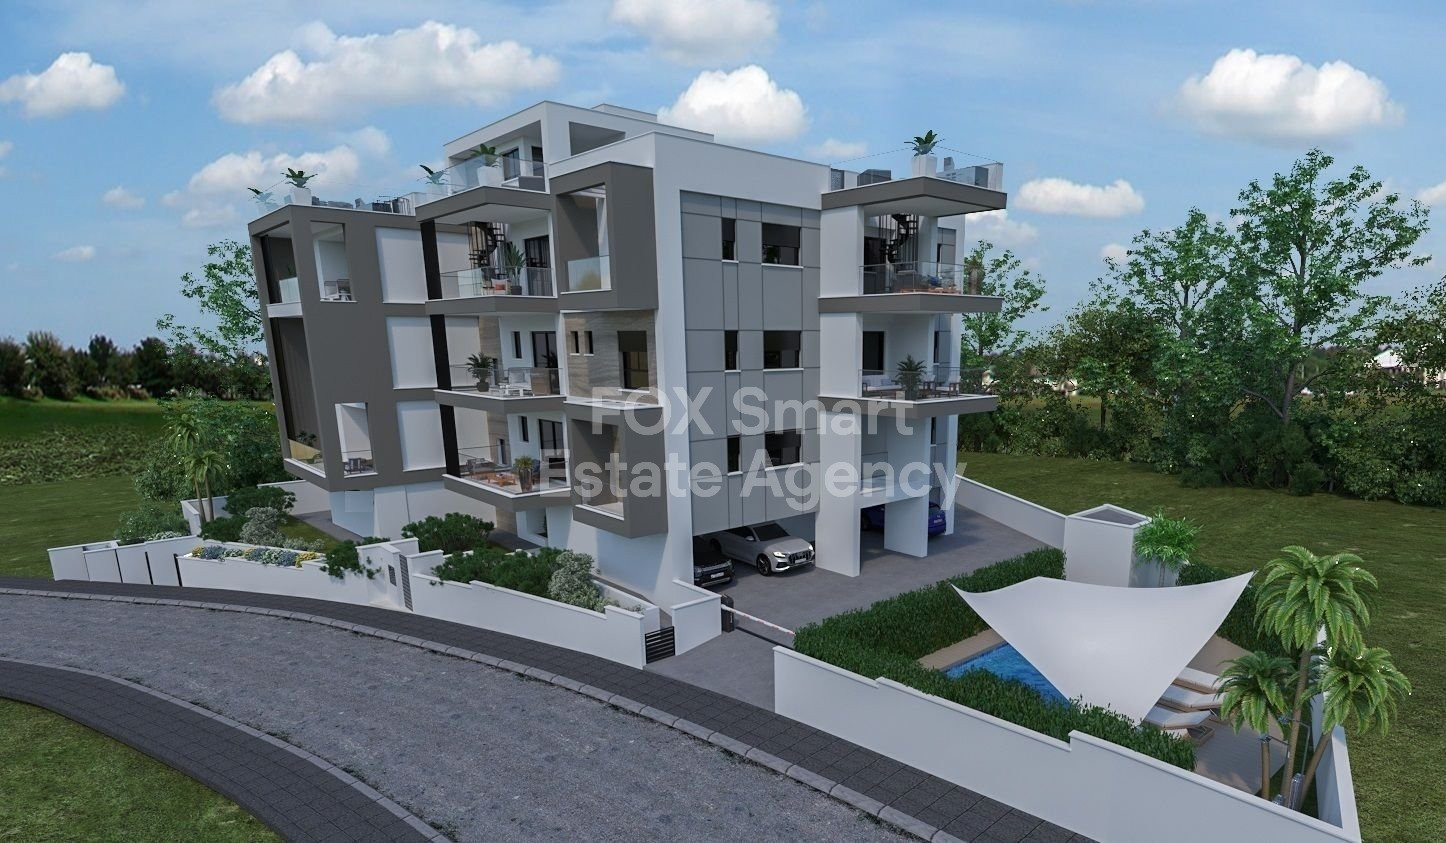 Apartment, For Sale, Limassol, Panthea  2 Bedrooms 1 Bathroo.....